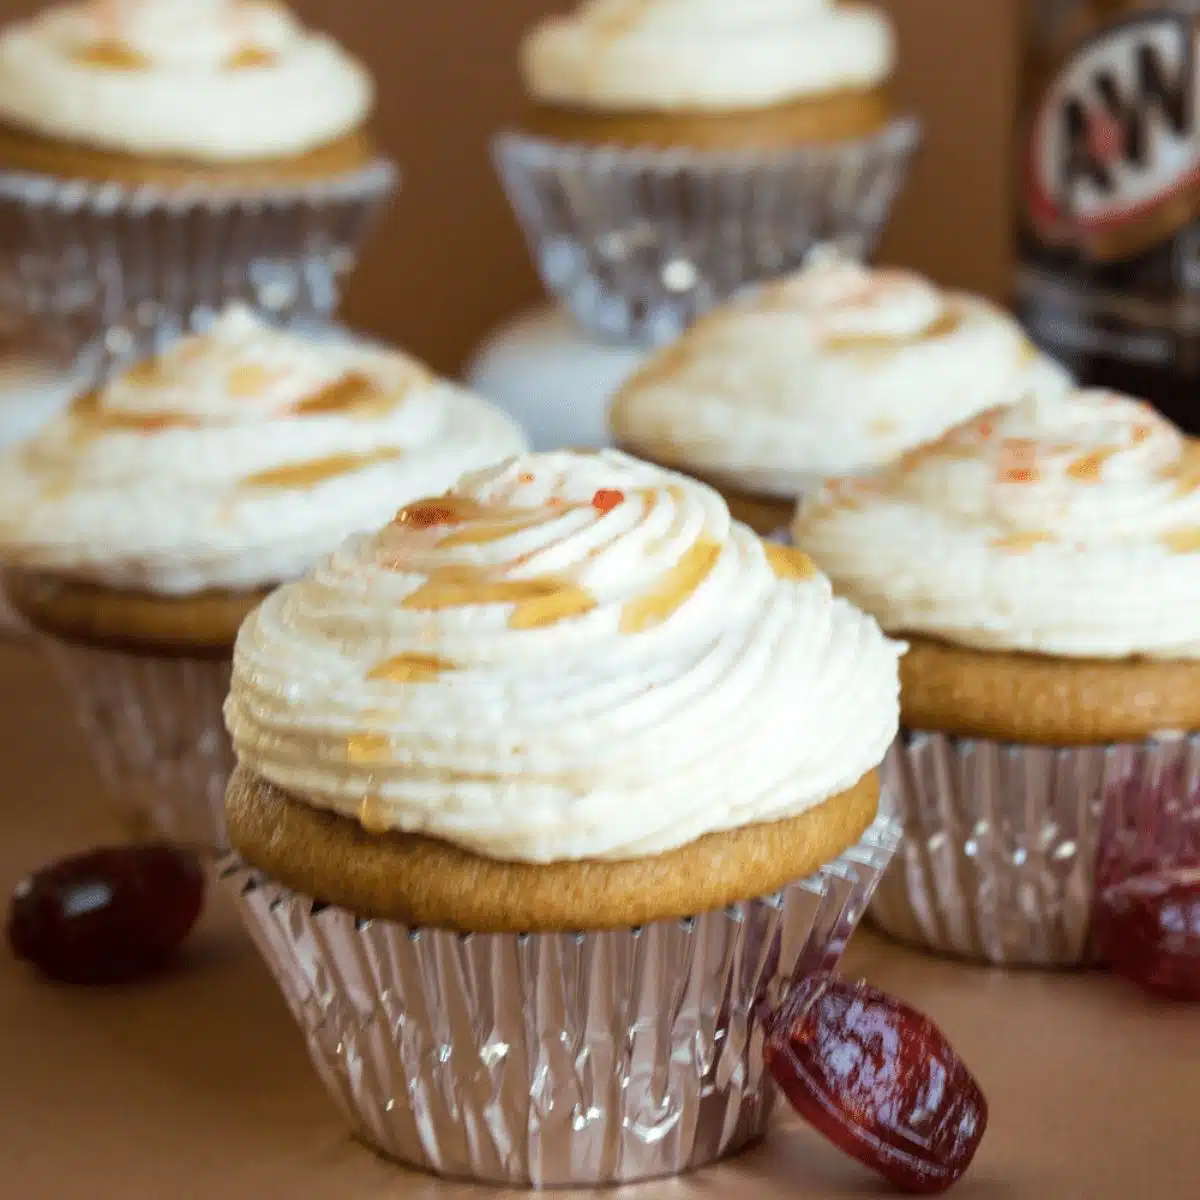 Square image of root beer cupcakes with cream soda frosting.